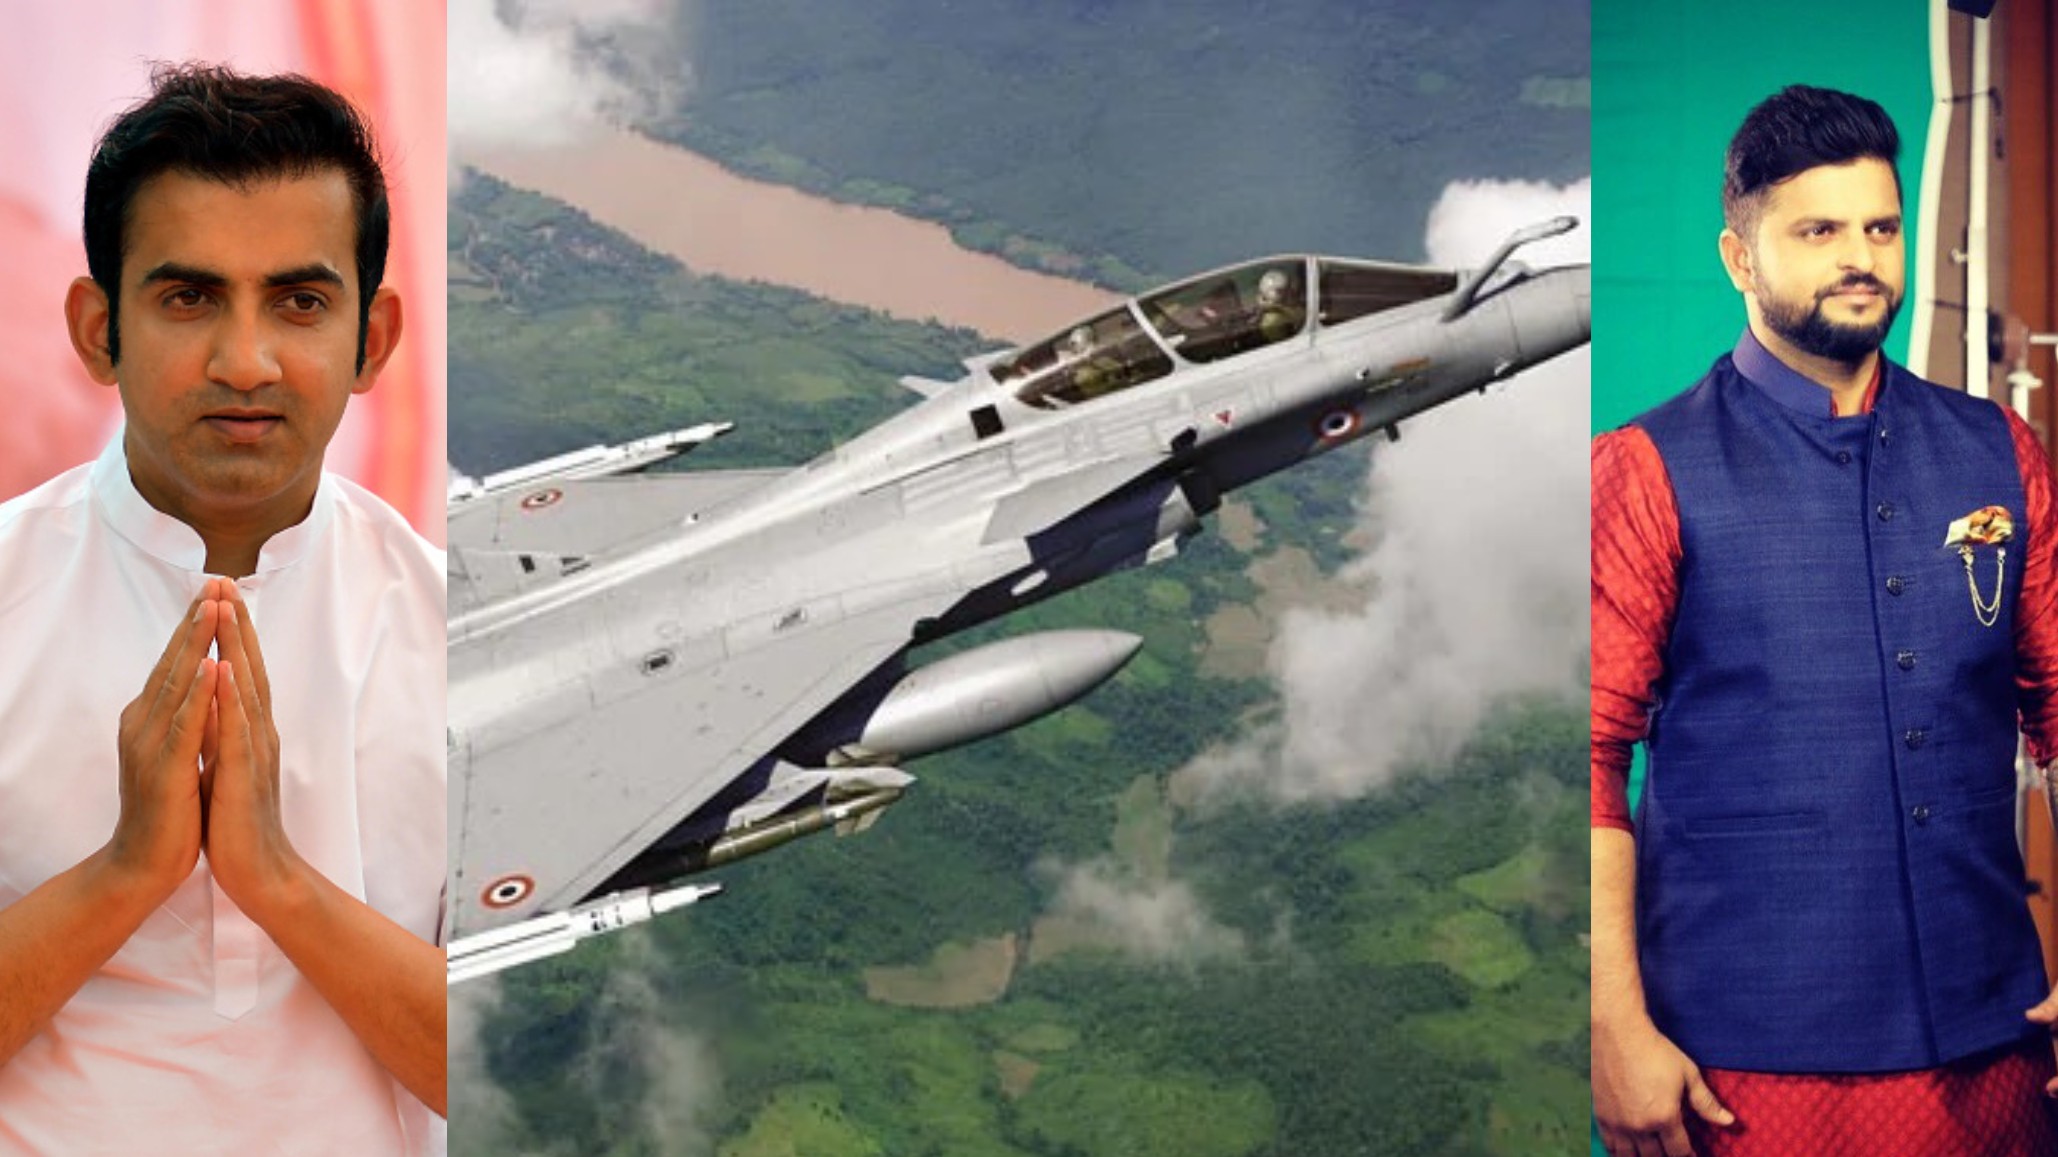 Indian cricket fraternity welcomes the first batch of Rafale fighter jets in the country